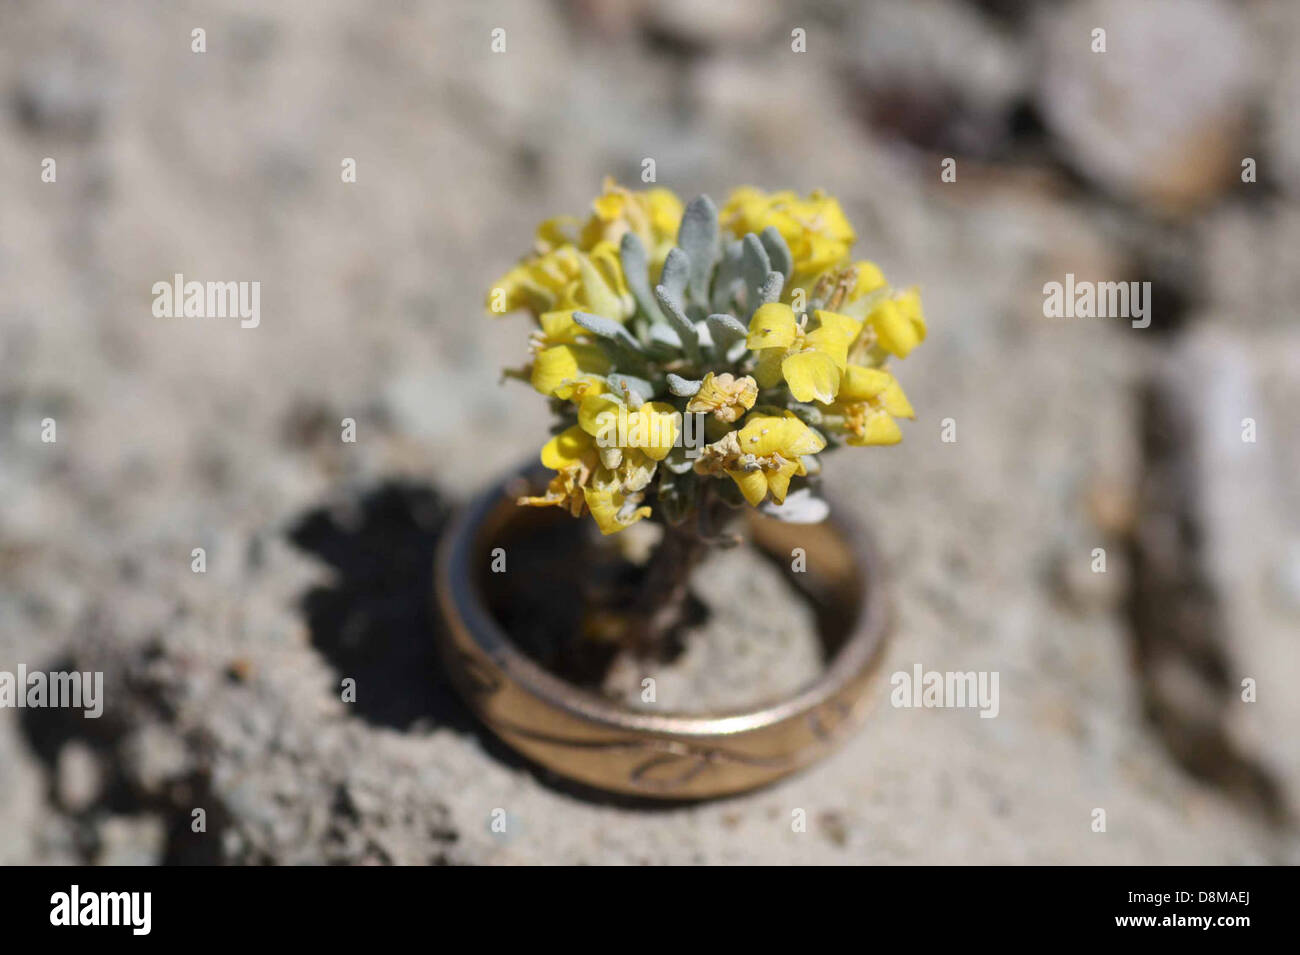 Physaria congesta plant in ring dudley bluffs bladderpod. Stock Photo